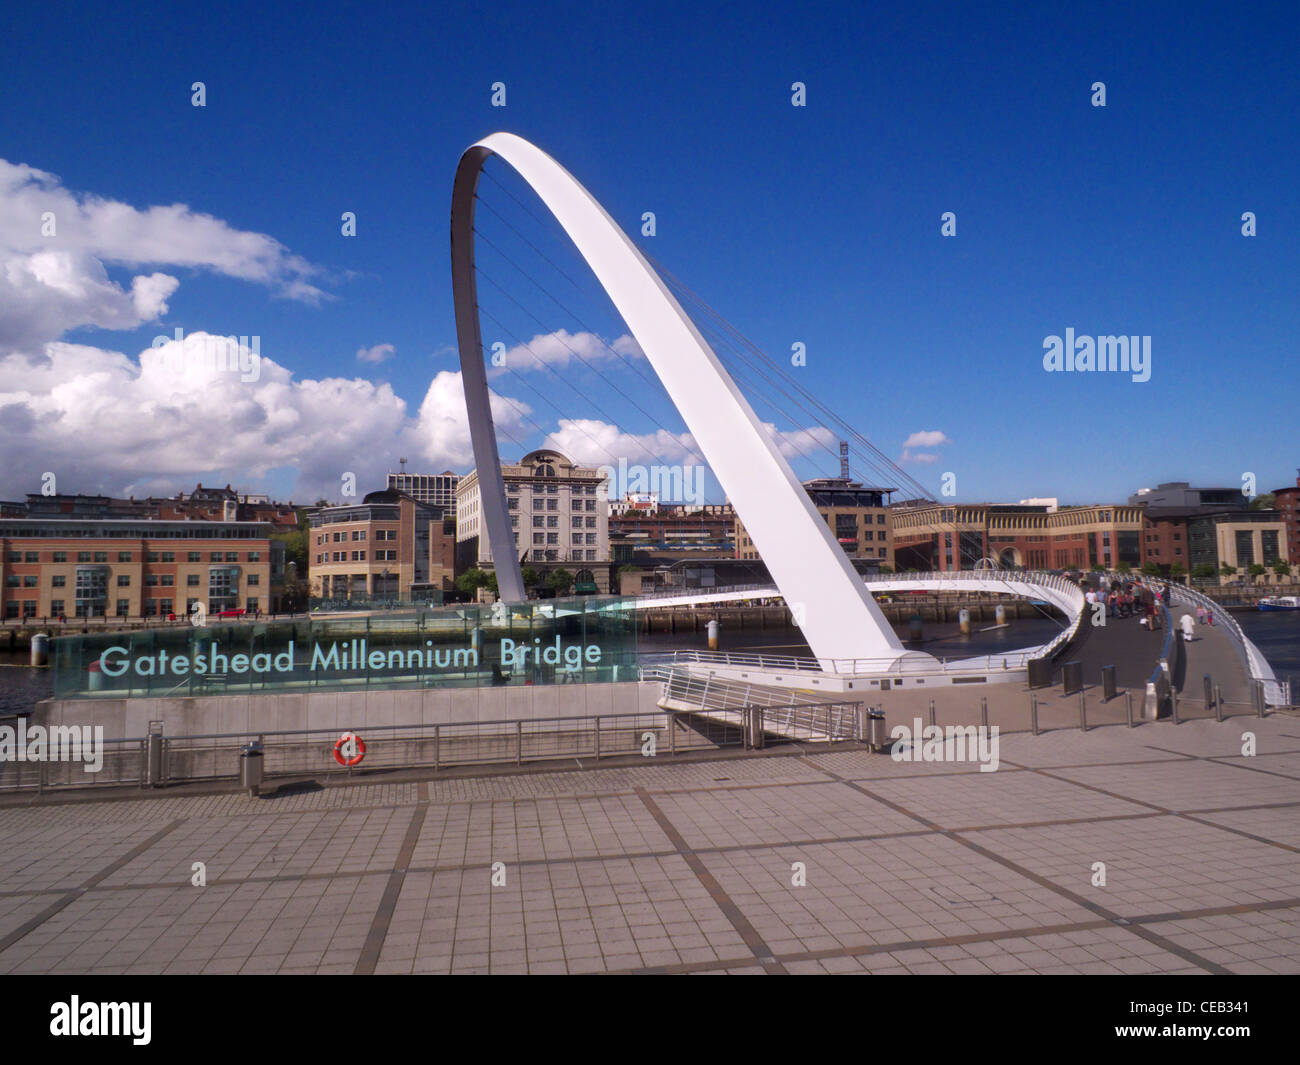 Gateshead Millennium Bridge. Over the river Tyne. Tyne and Wear. The worlds first and only Tilting bridge. Stock Photo